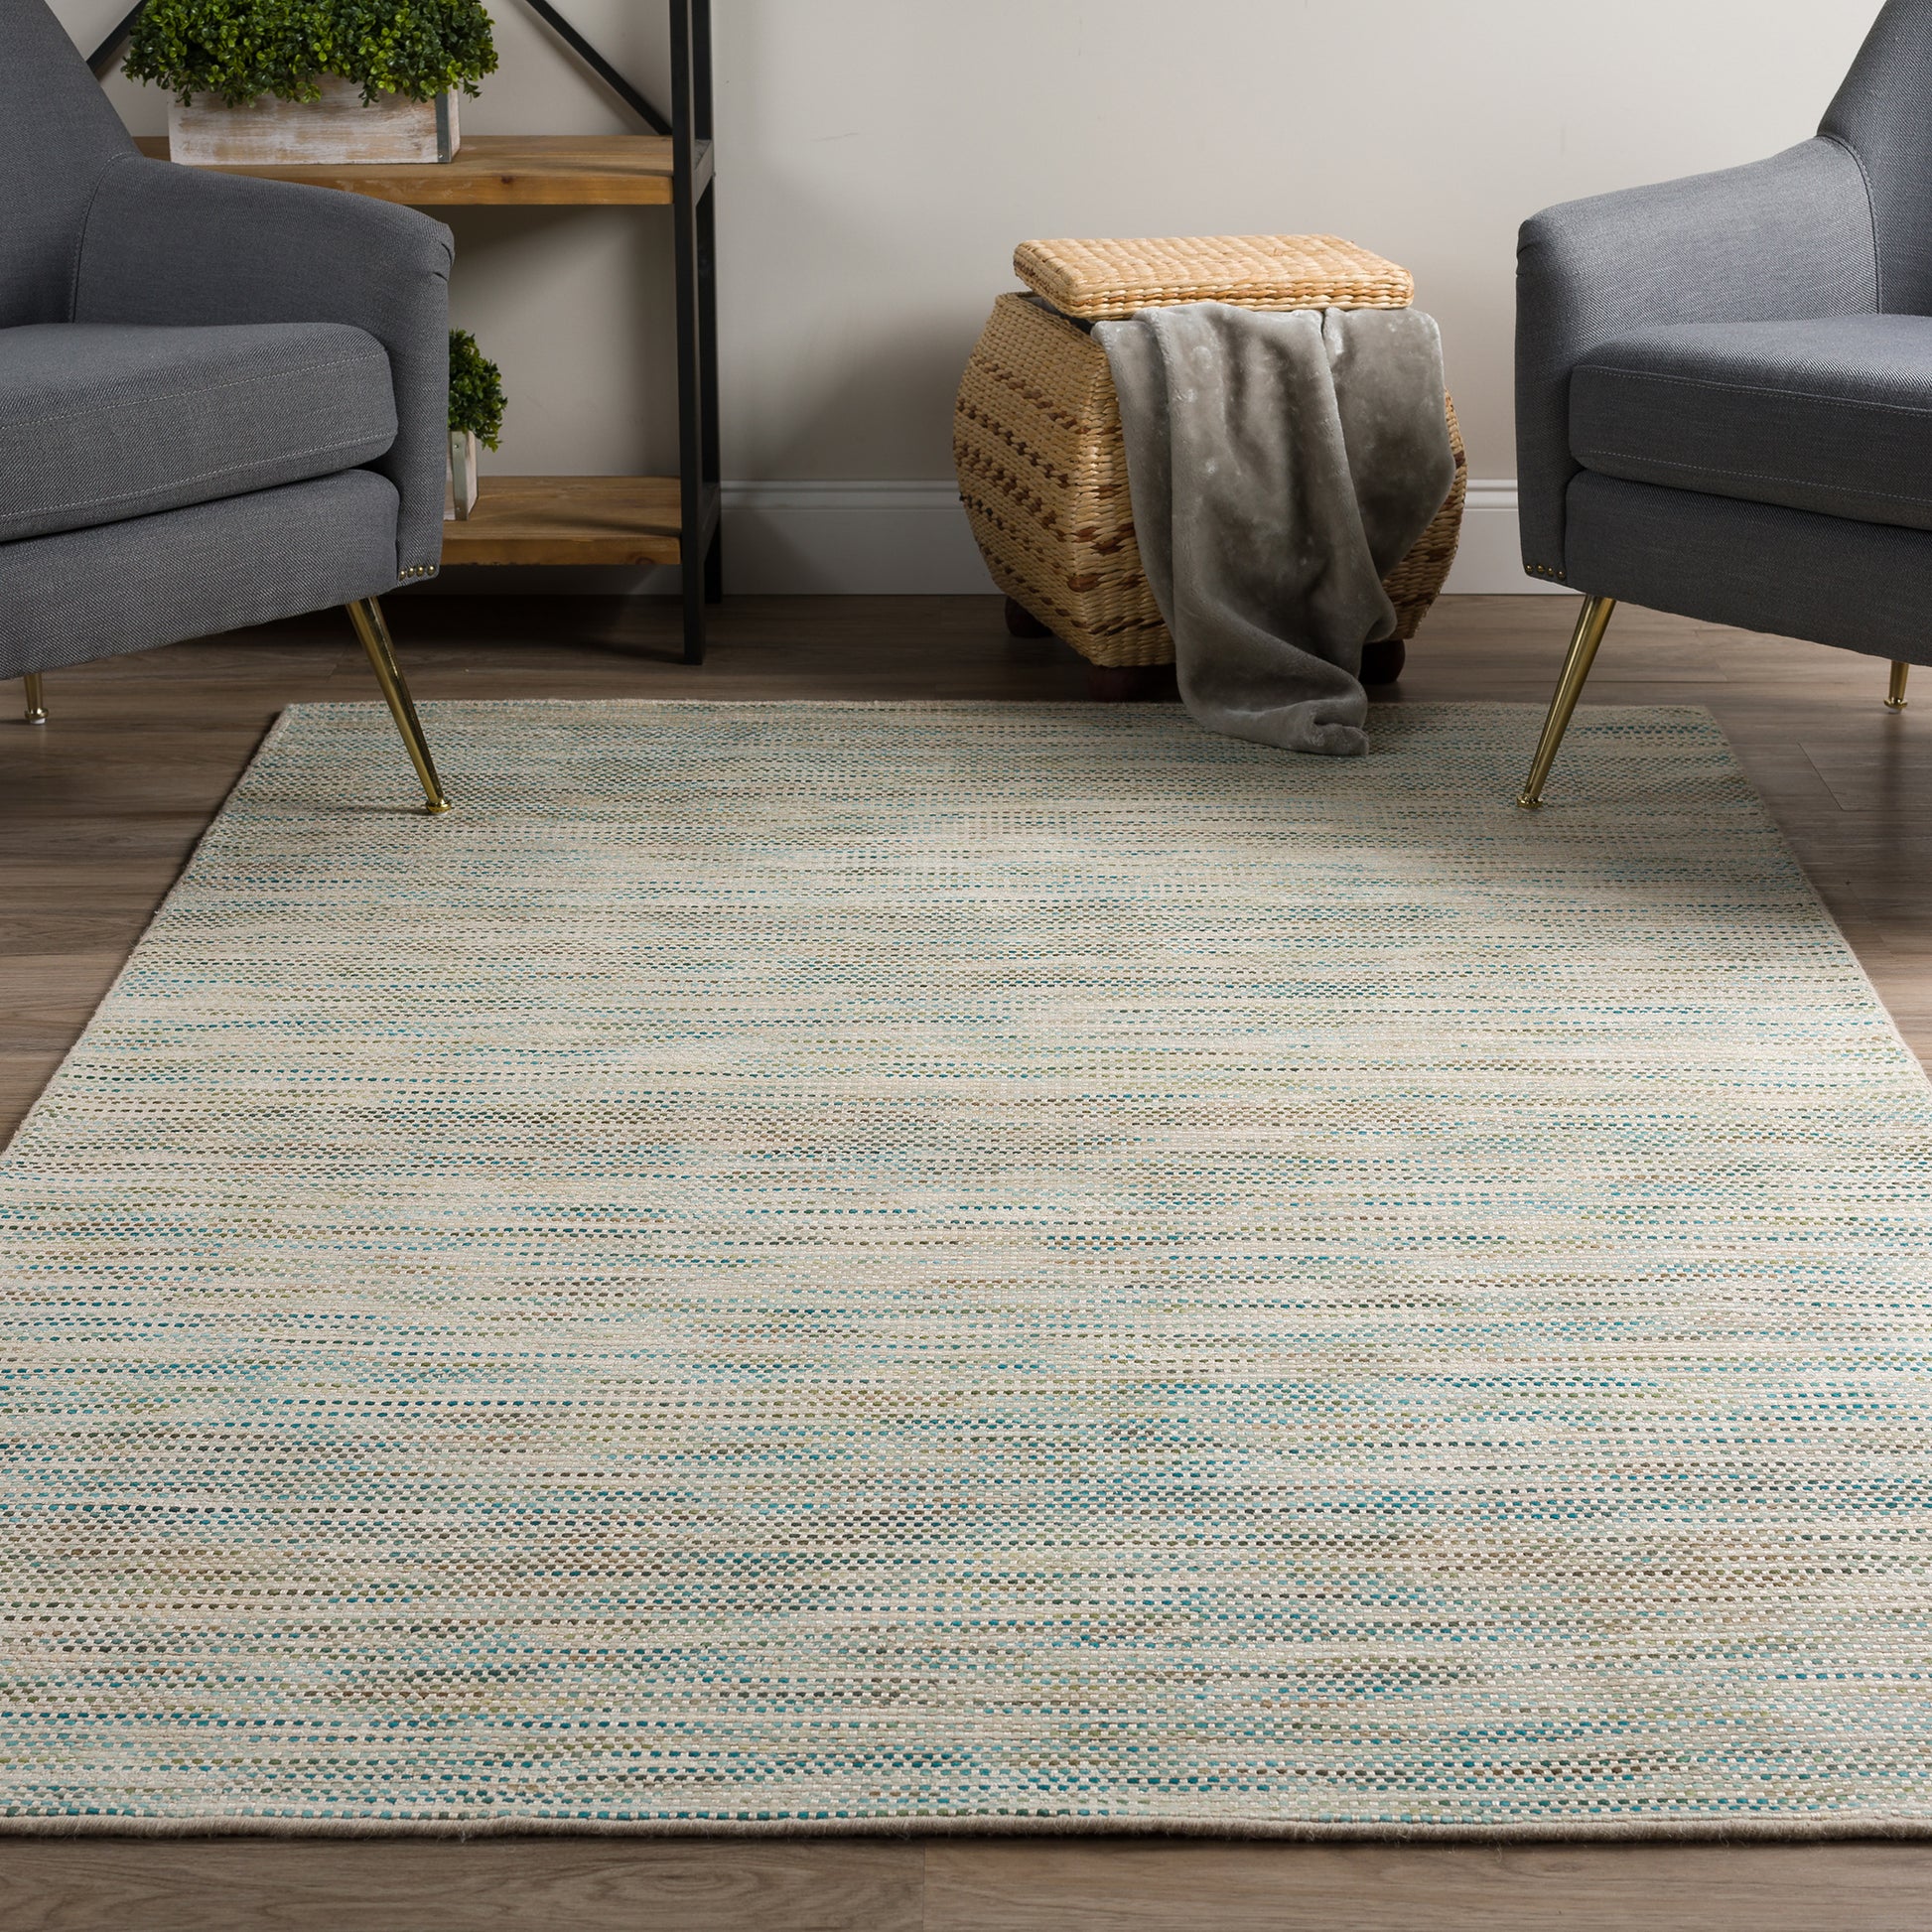 Dalyn Zion Zn1 Taupe Area Rug